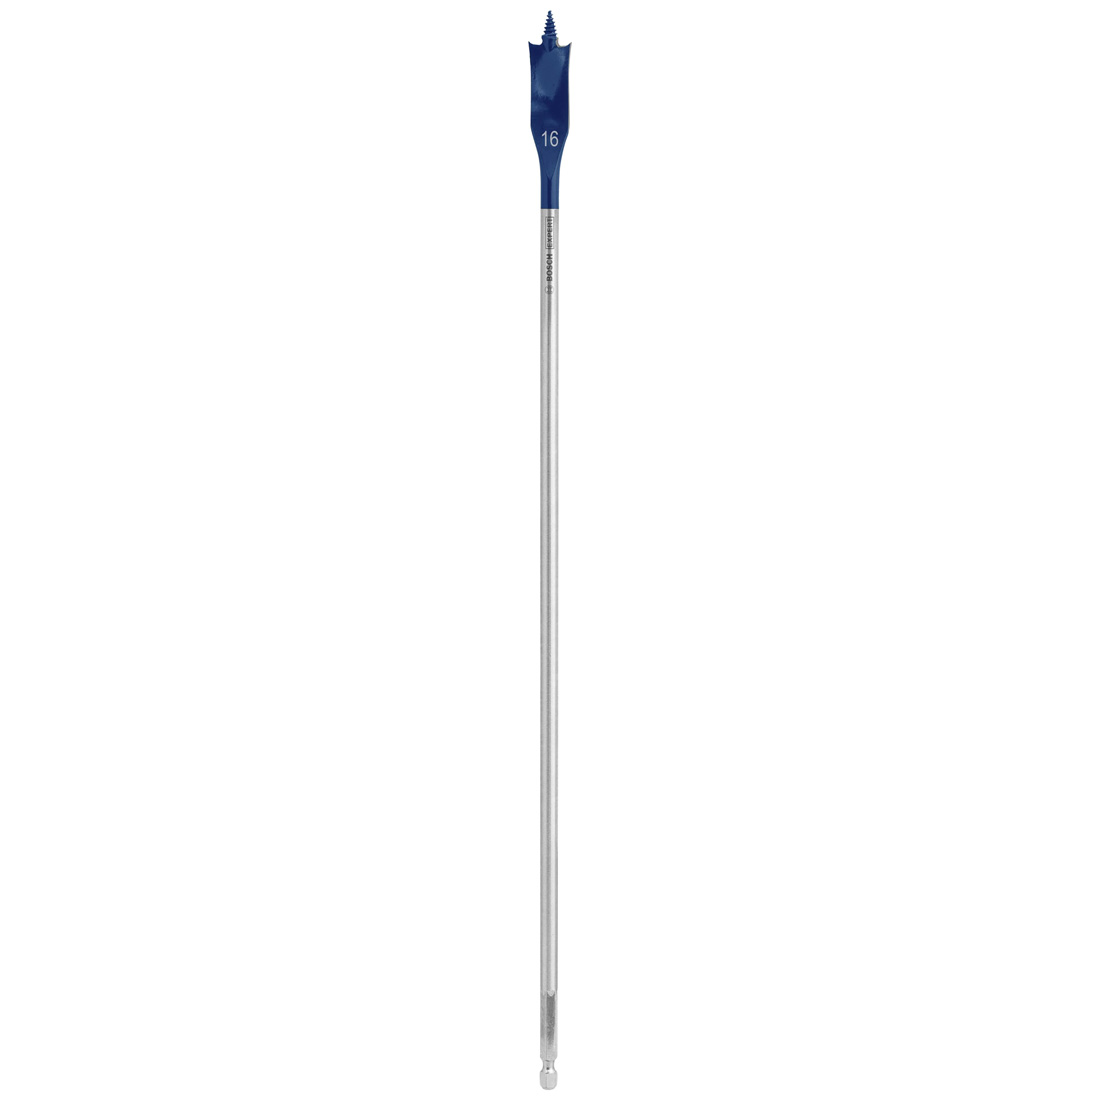 Bosch Professional 1x Expert SelfCut Speed Spade Drill Bit for Softwood, Chipboard, Ø 40,00 mm, Accessories Rotary Impact Drill 